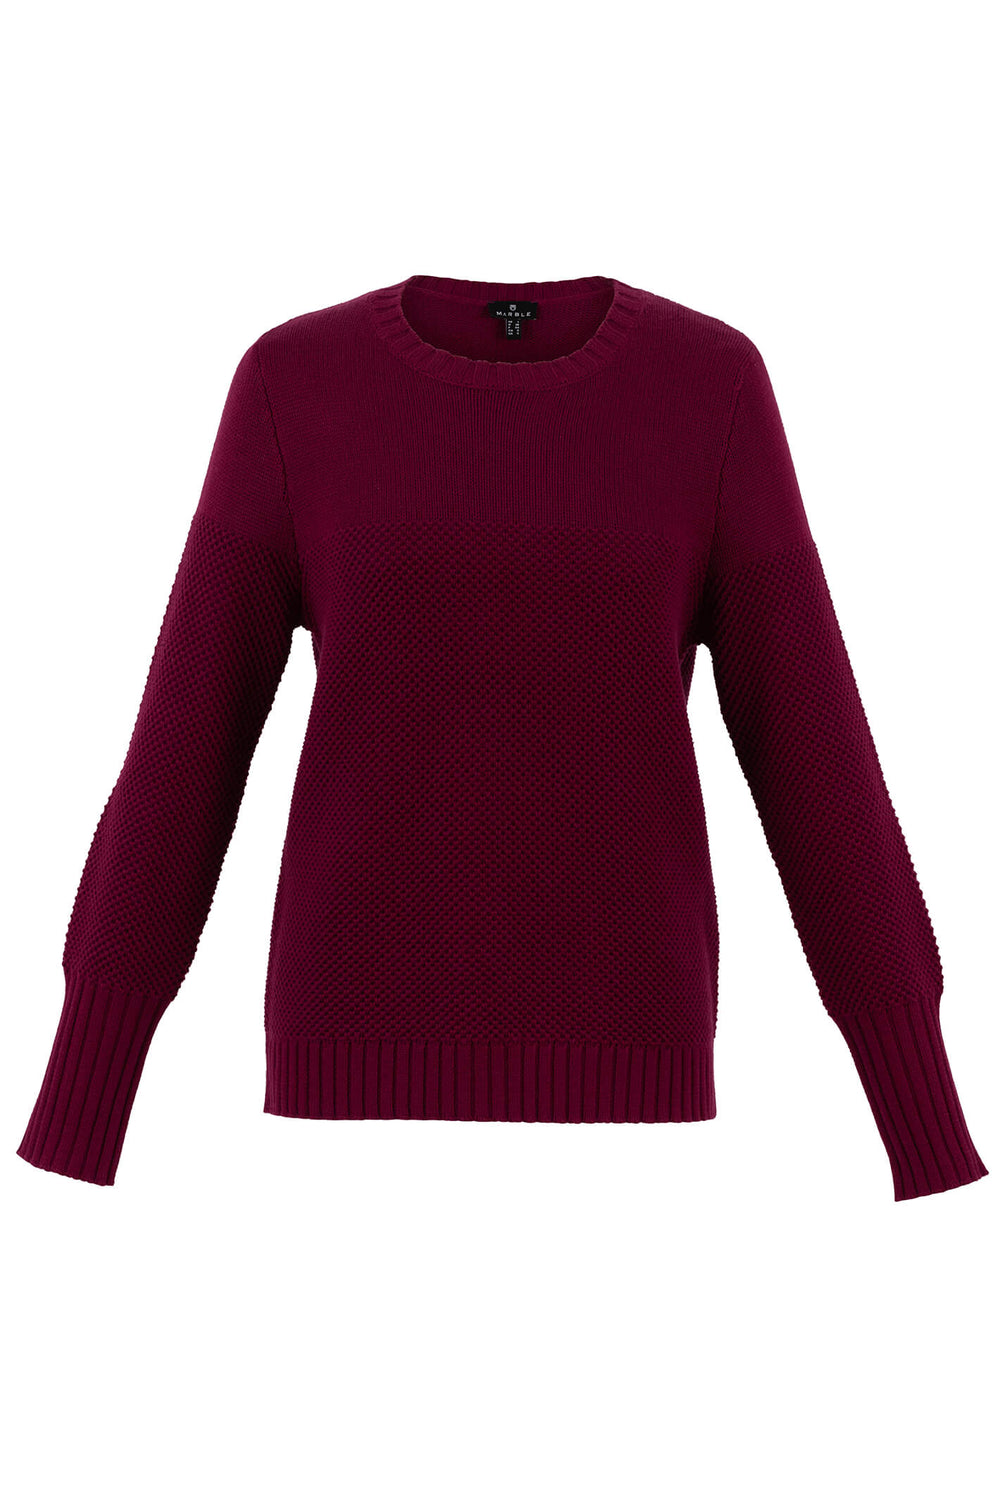 Marble 7203 205 Berry Red Jumper With Snood - Dotique